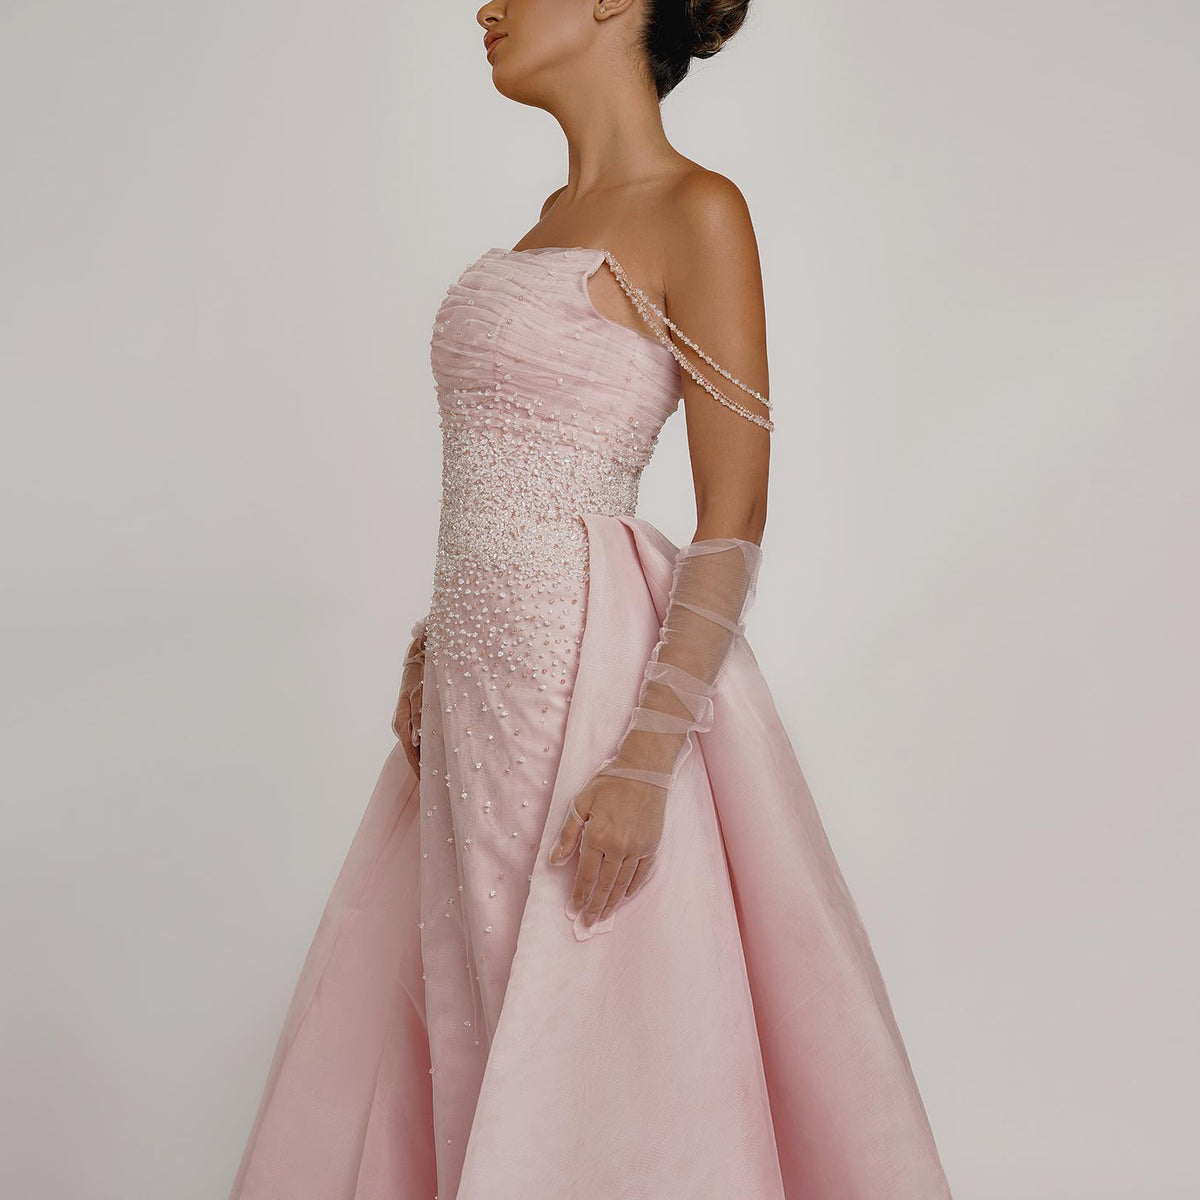 Sharon Said Luxury Dubai Beaded Pink Evening Dress with Overskirt Gloves Elegant Women Arabic Wedding Formal Party Gown SS429